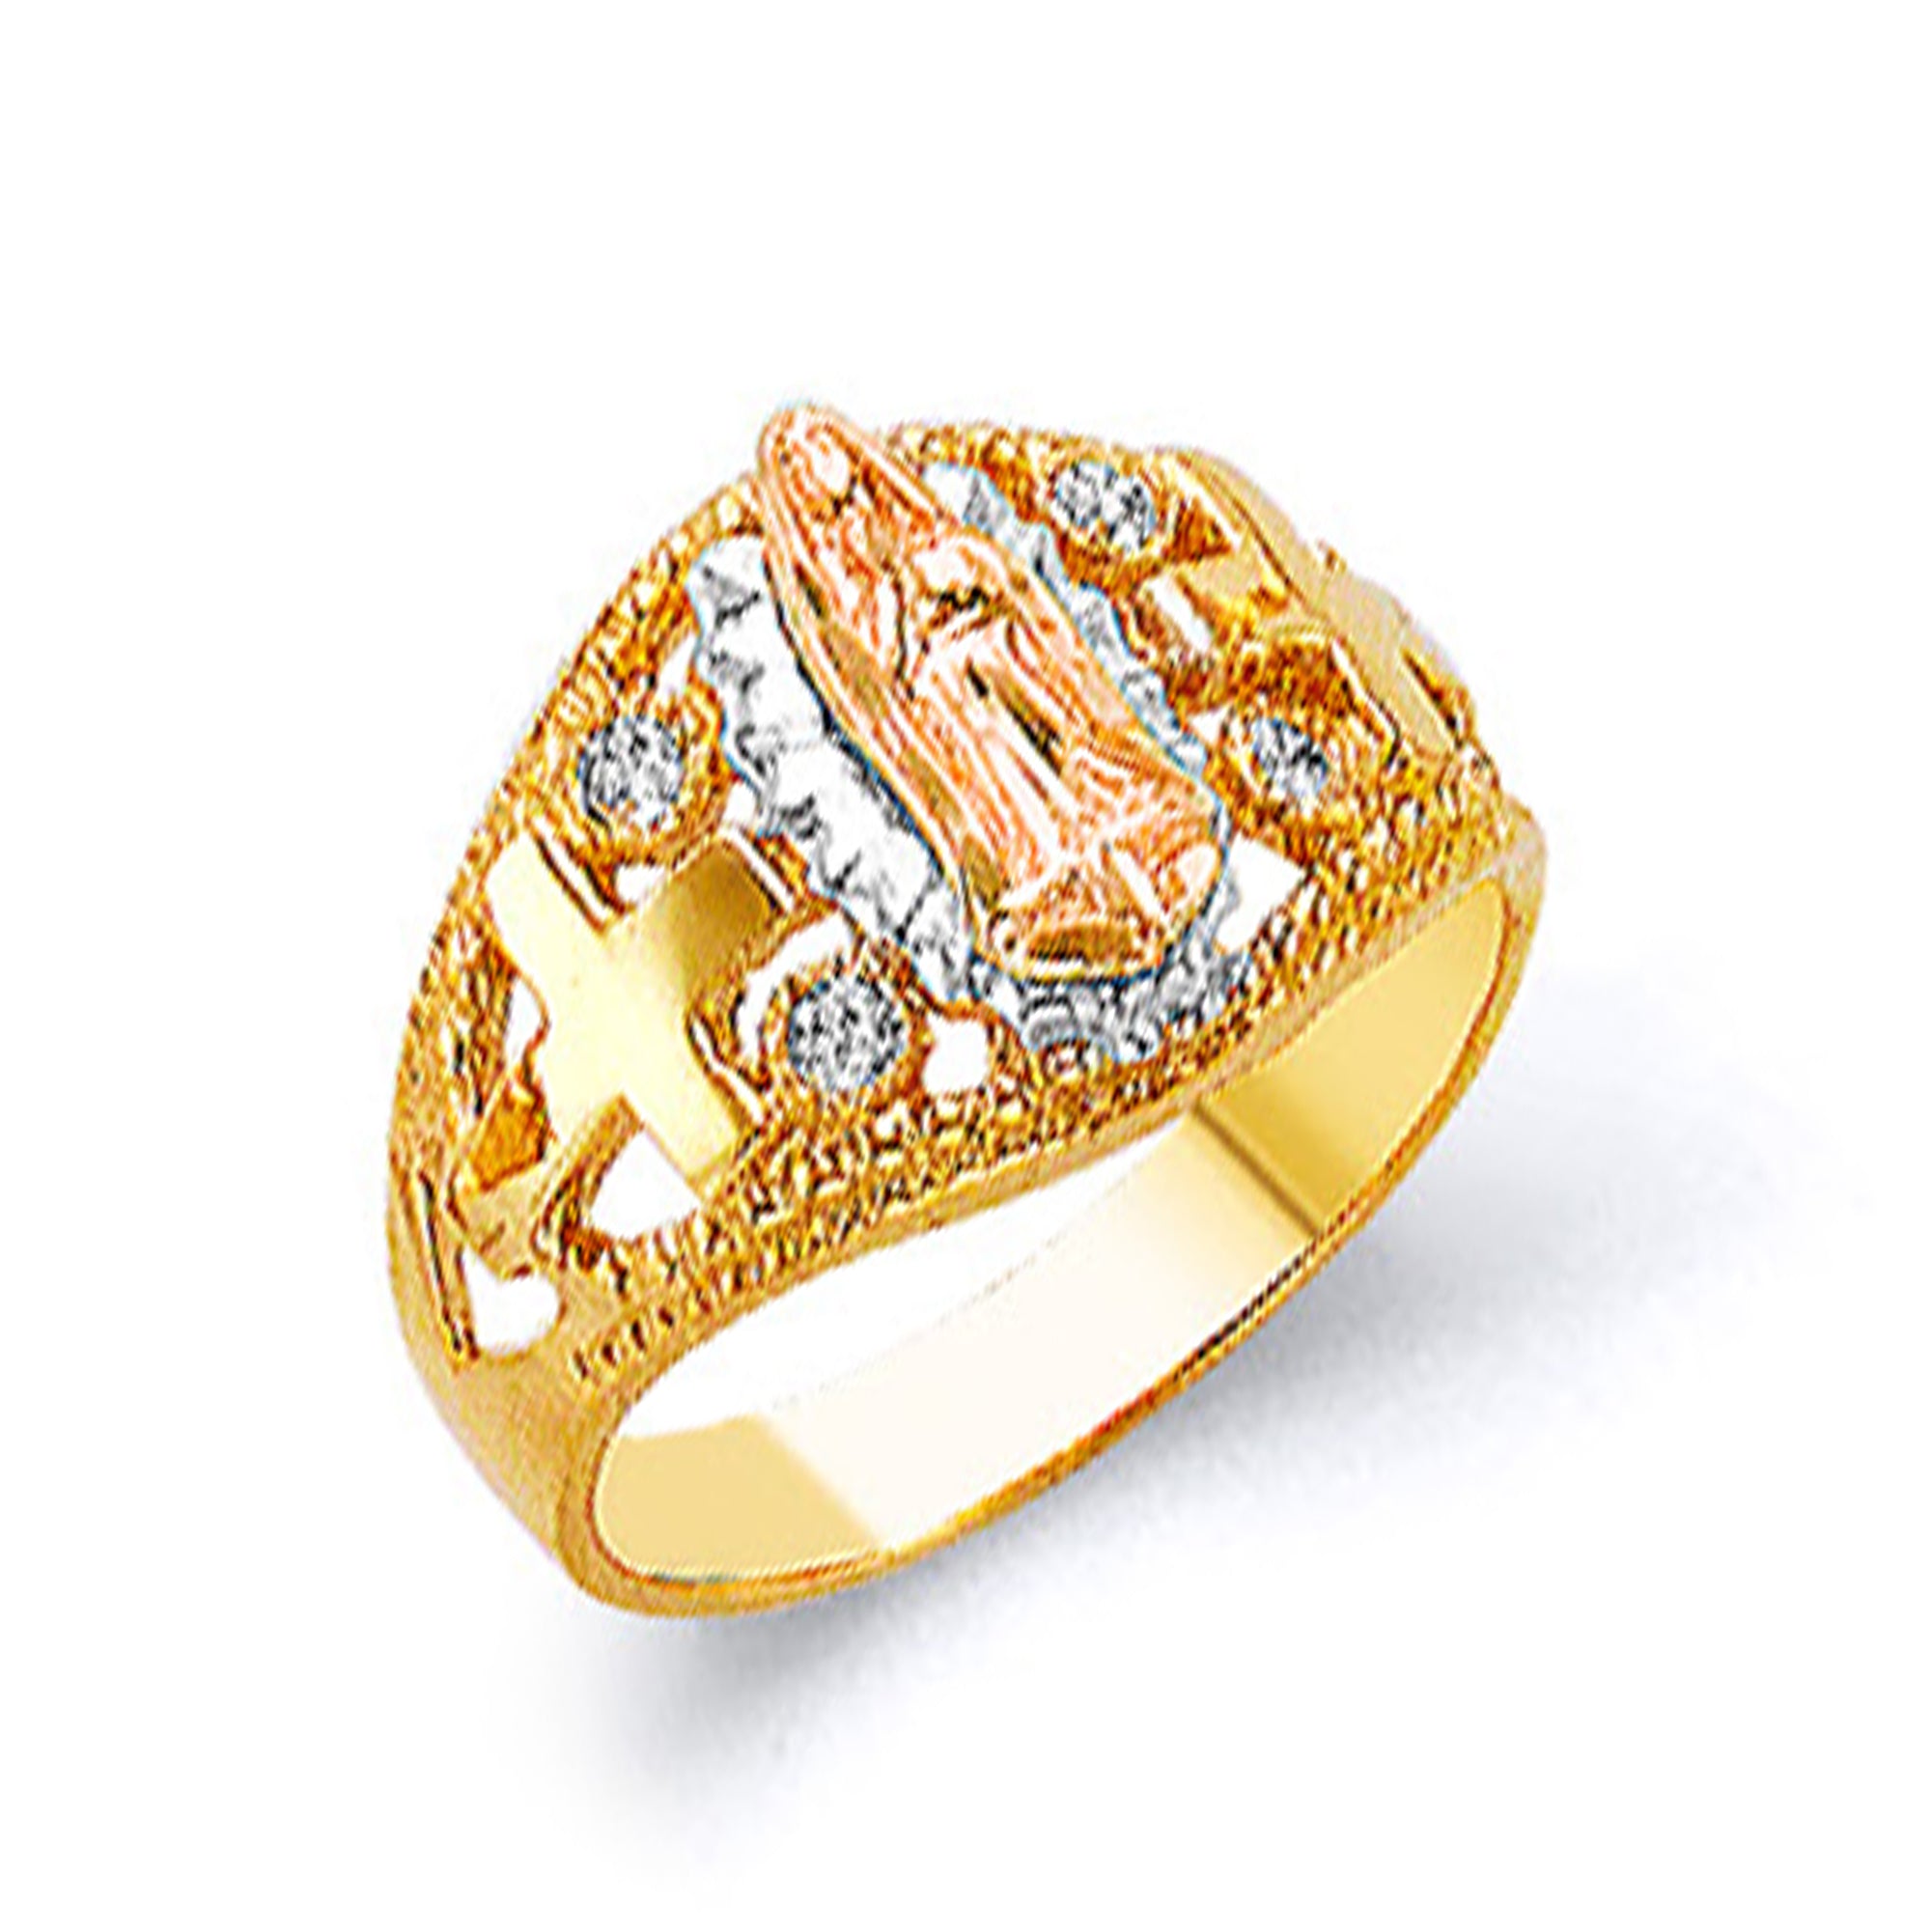 Tri-tone Textured Shank Religious Ring in Solid Gold 